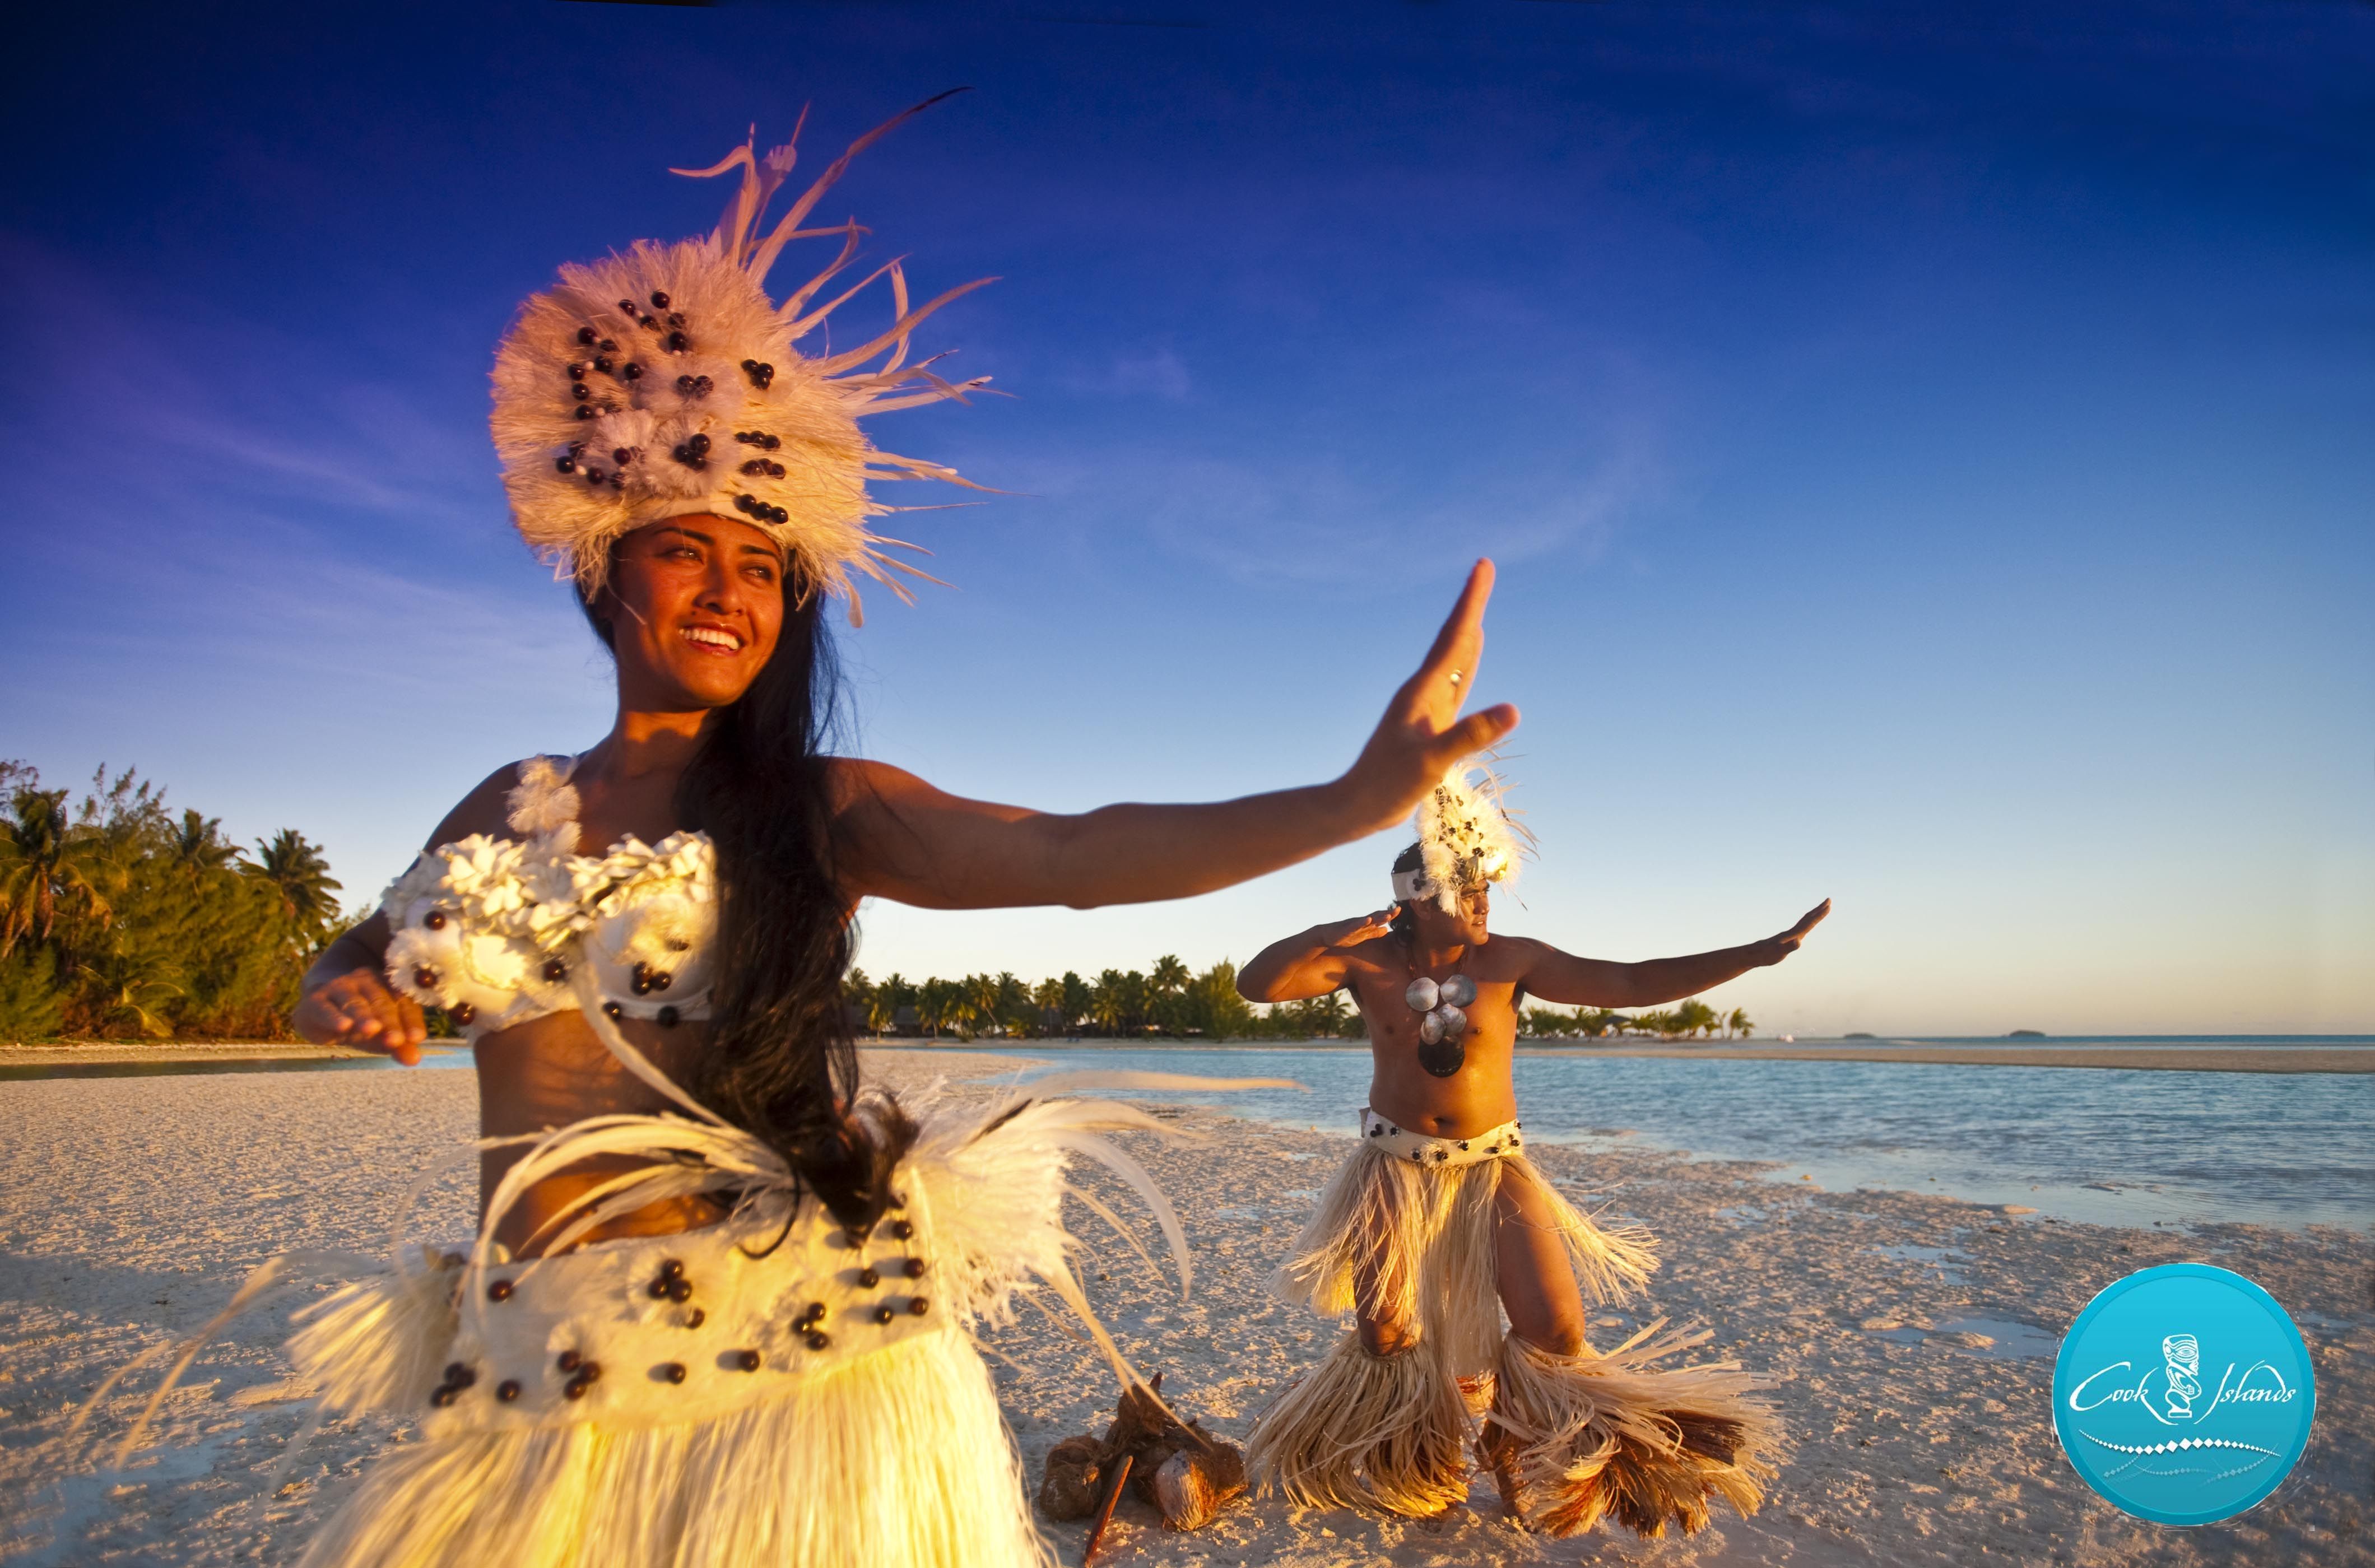 A cook islander man and woman dancing their traditional dance along the beach